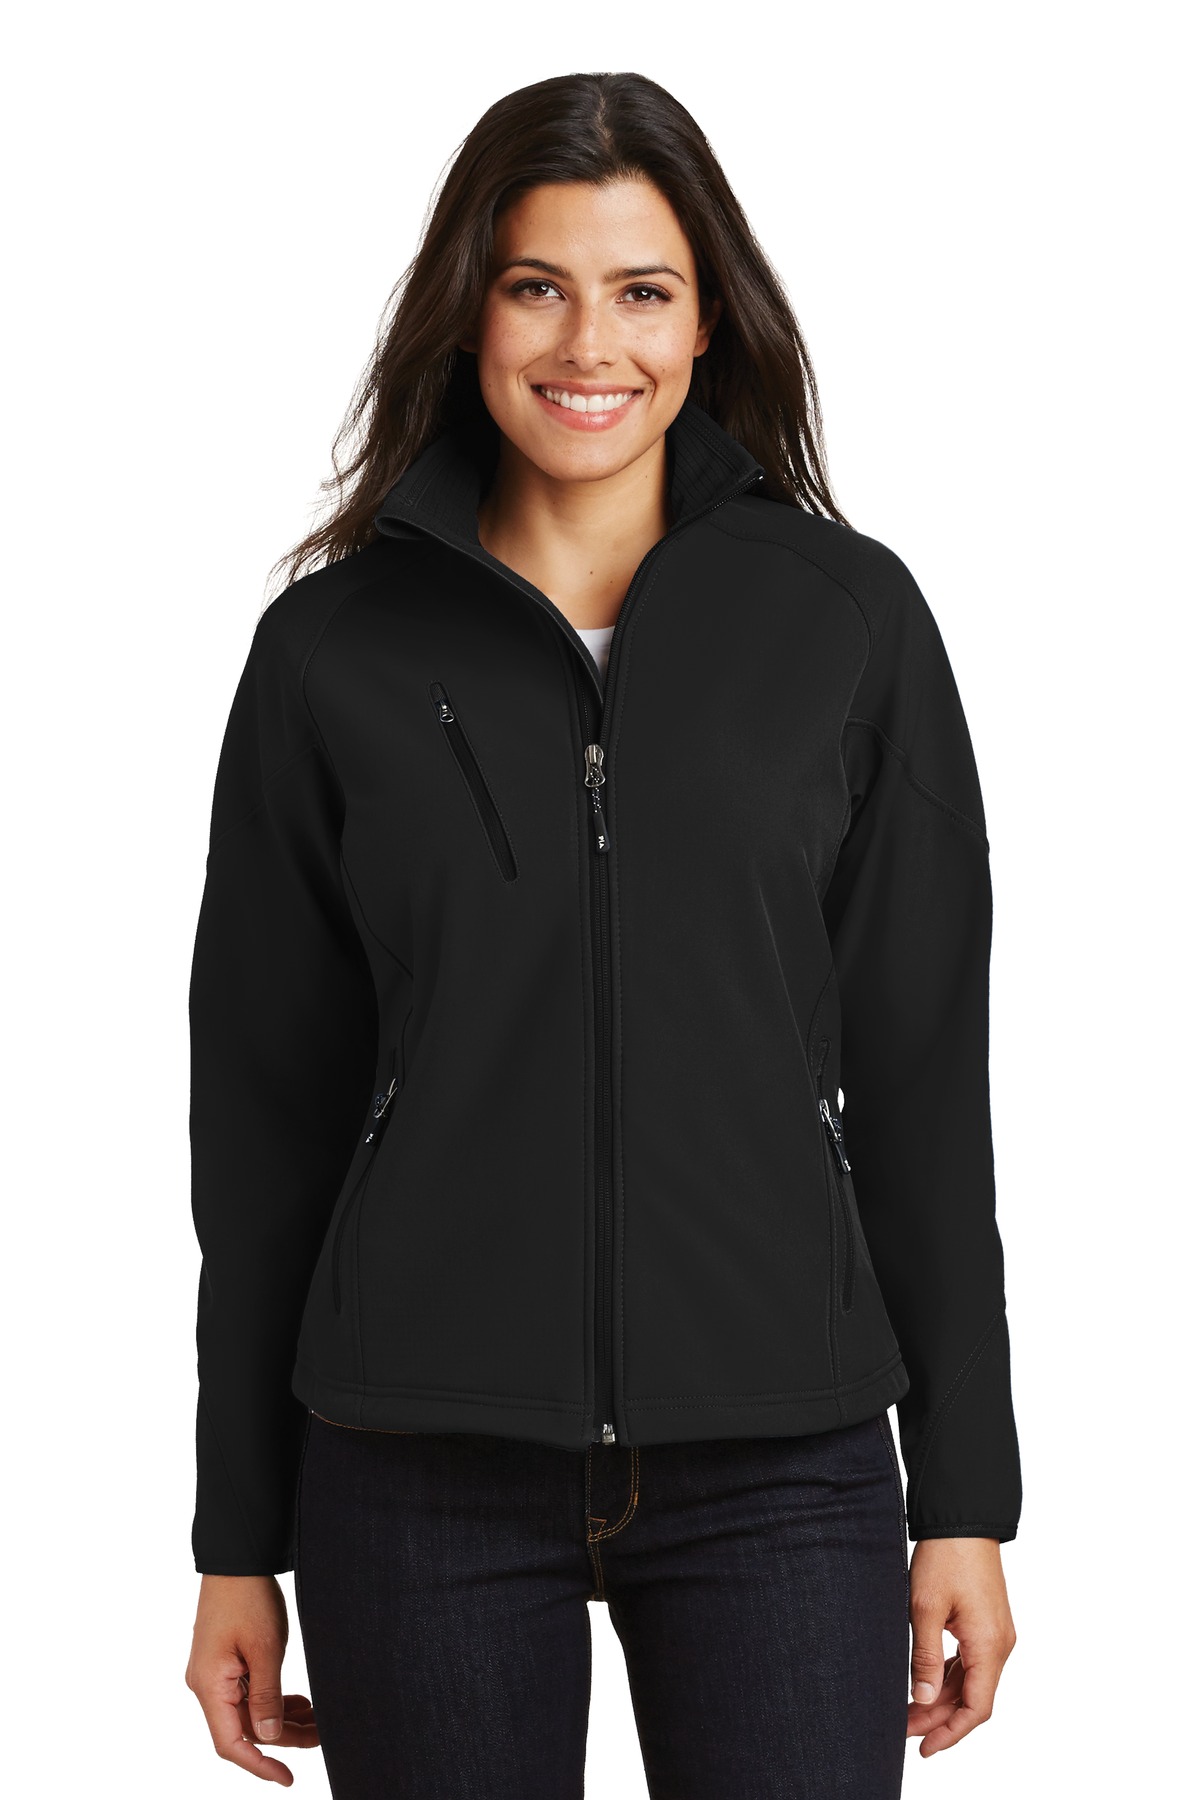 Port Authority Ladies Outerwear for Hospitality ® Ladies Textured Soft Shell Jacket.-Port Authority